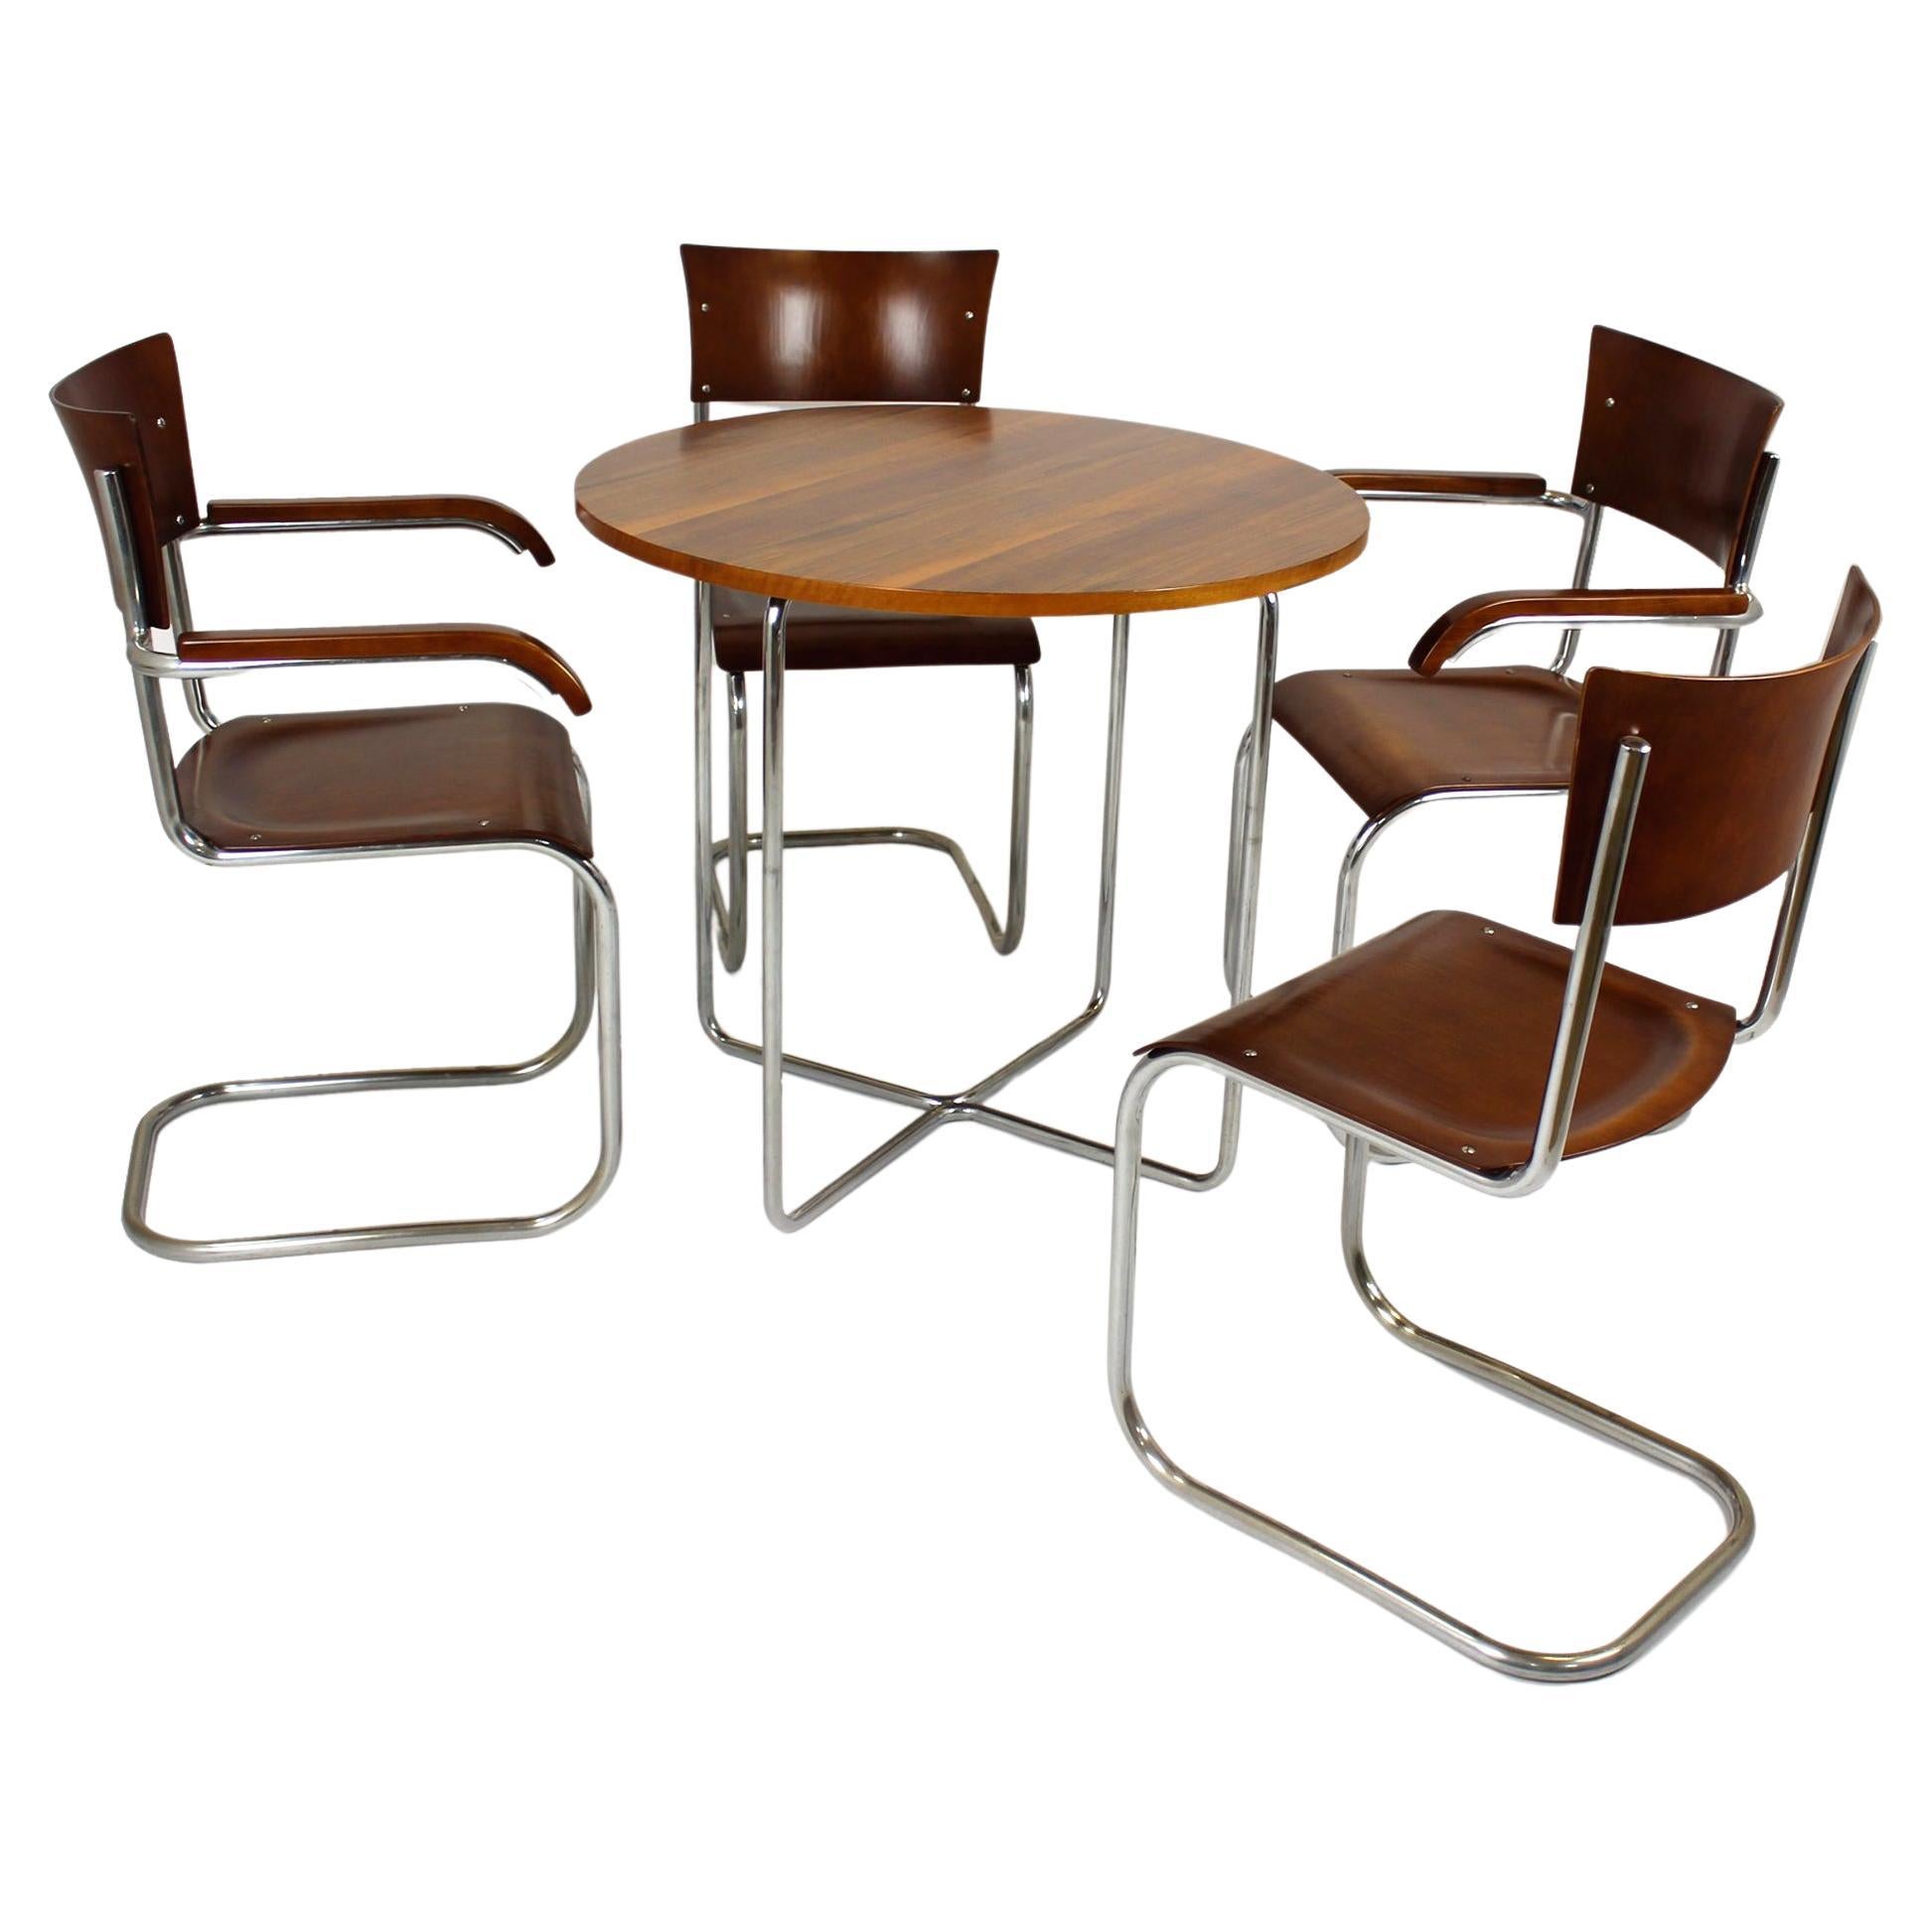 Restored Bauhaus Tubular Steel Set, Round Table and Four Chairs by Mart Stam, 19